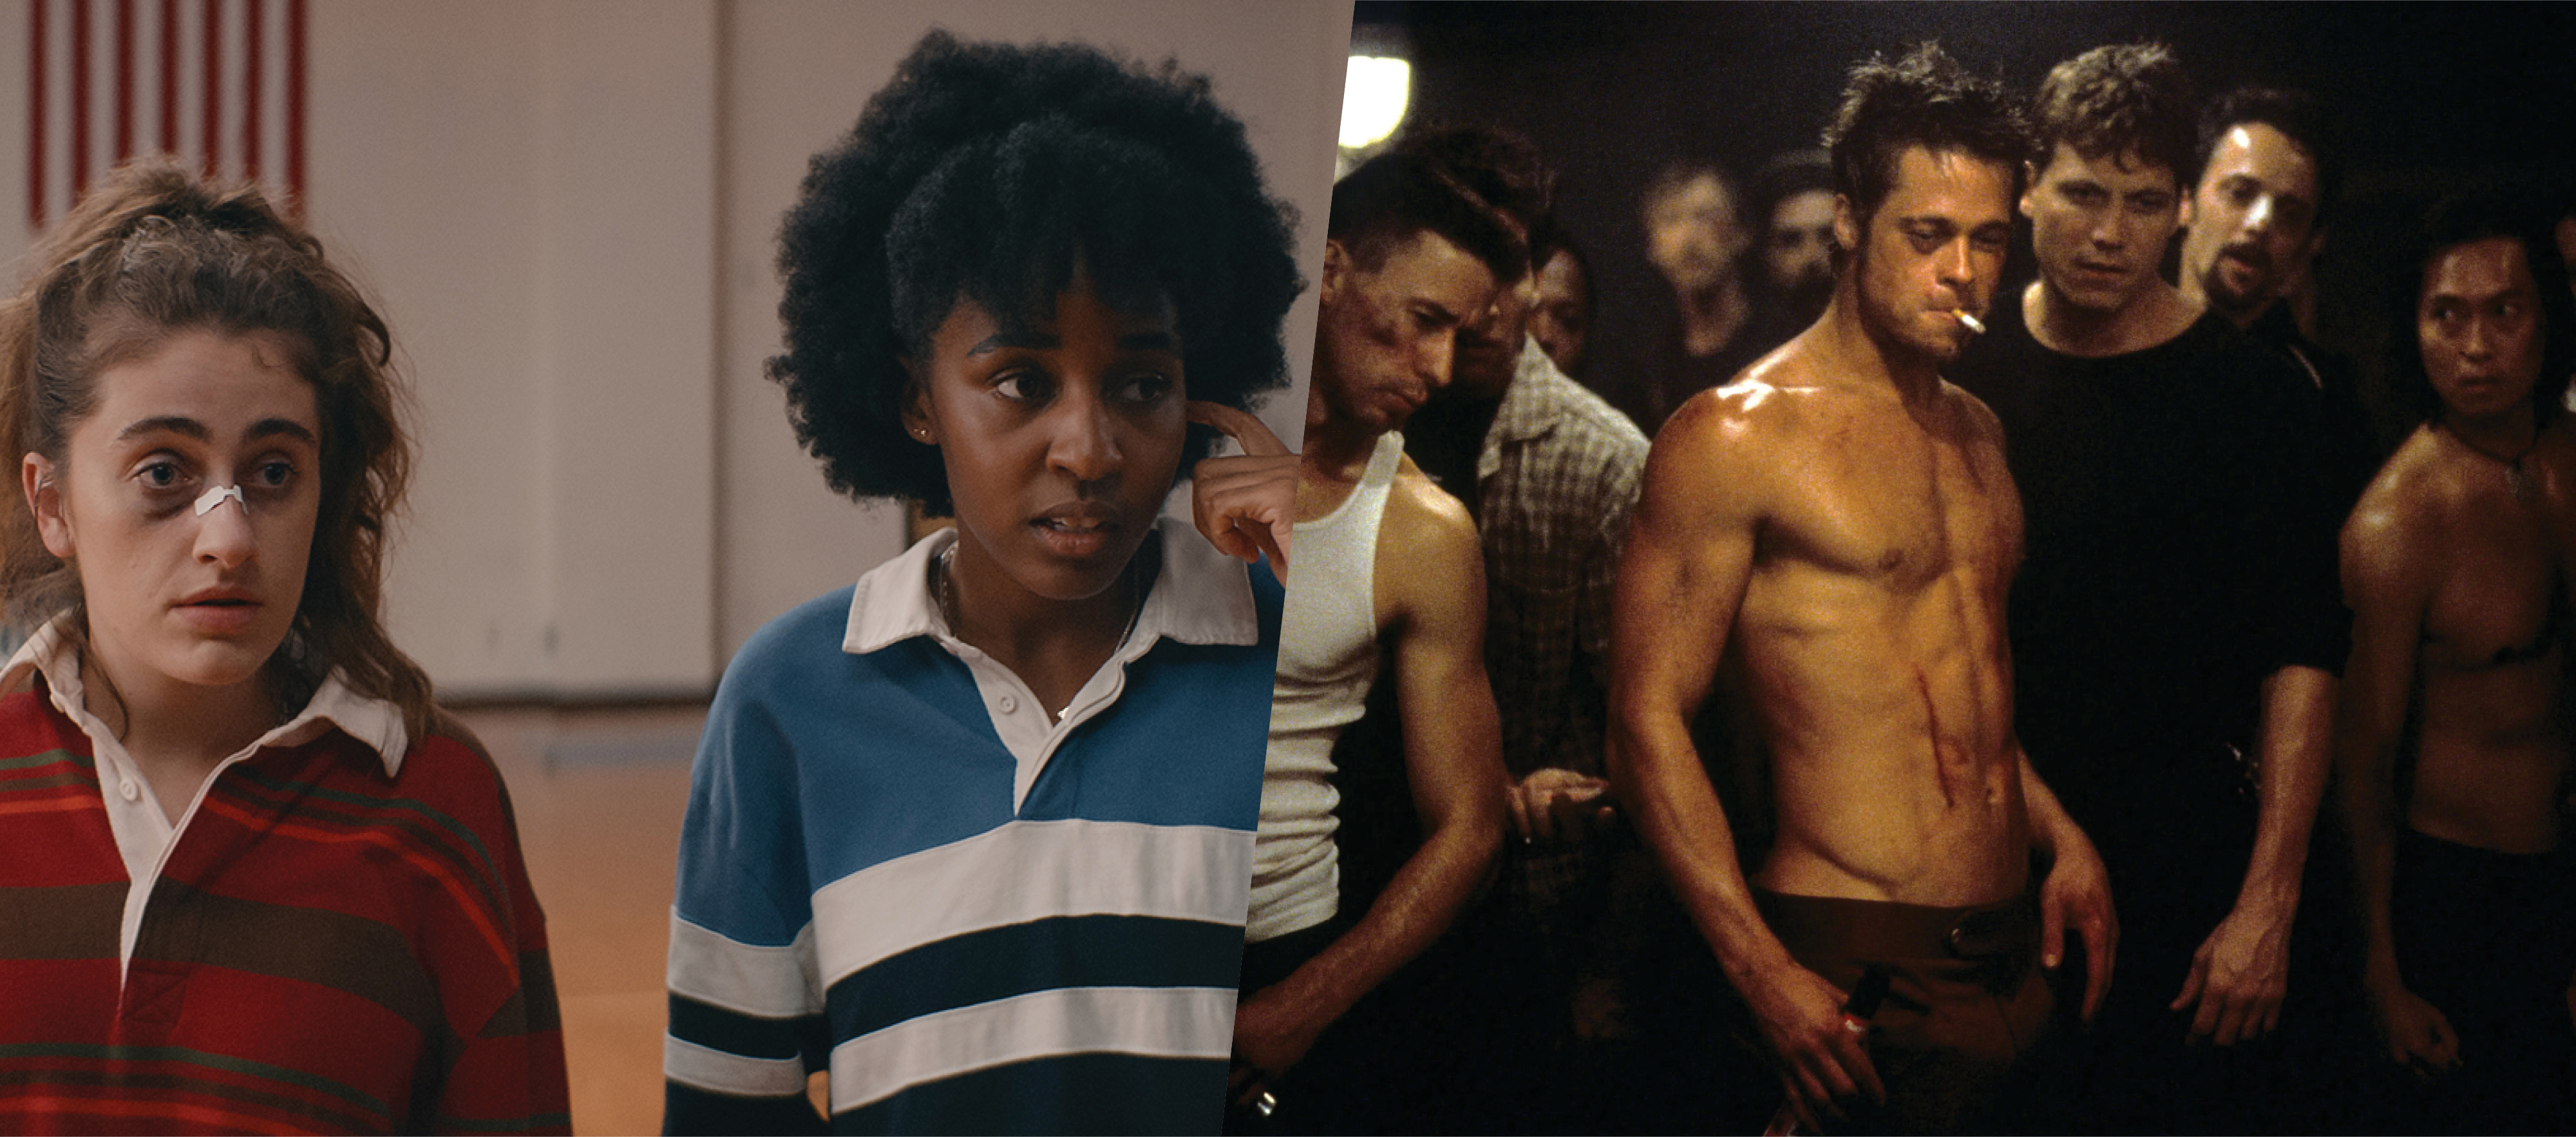 left image shows two teenage girls wearing polo shirts, one with a bandage on her nose; right image is a group of men with a shirtless Brad Pitt in front.